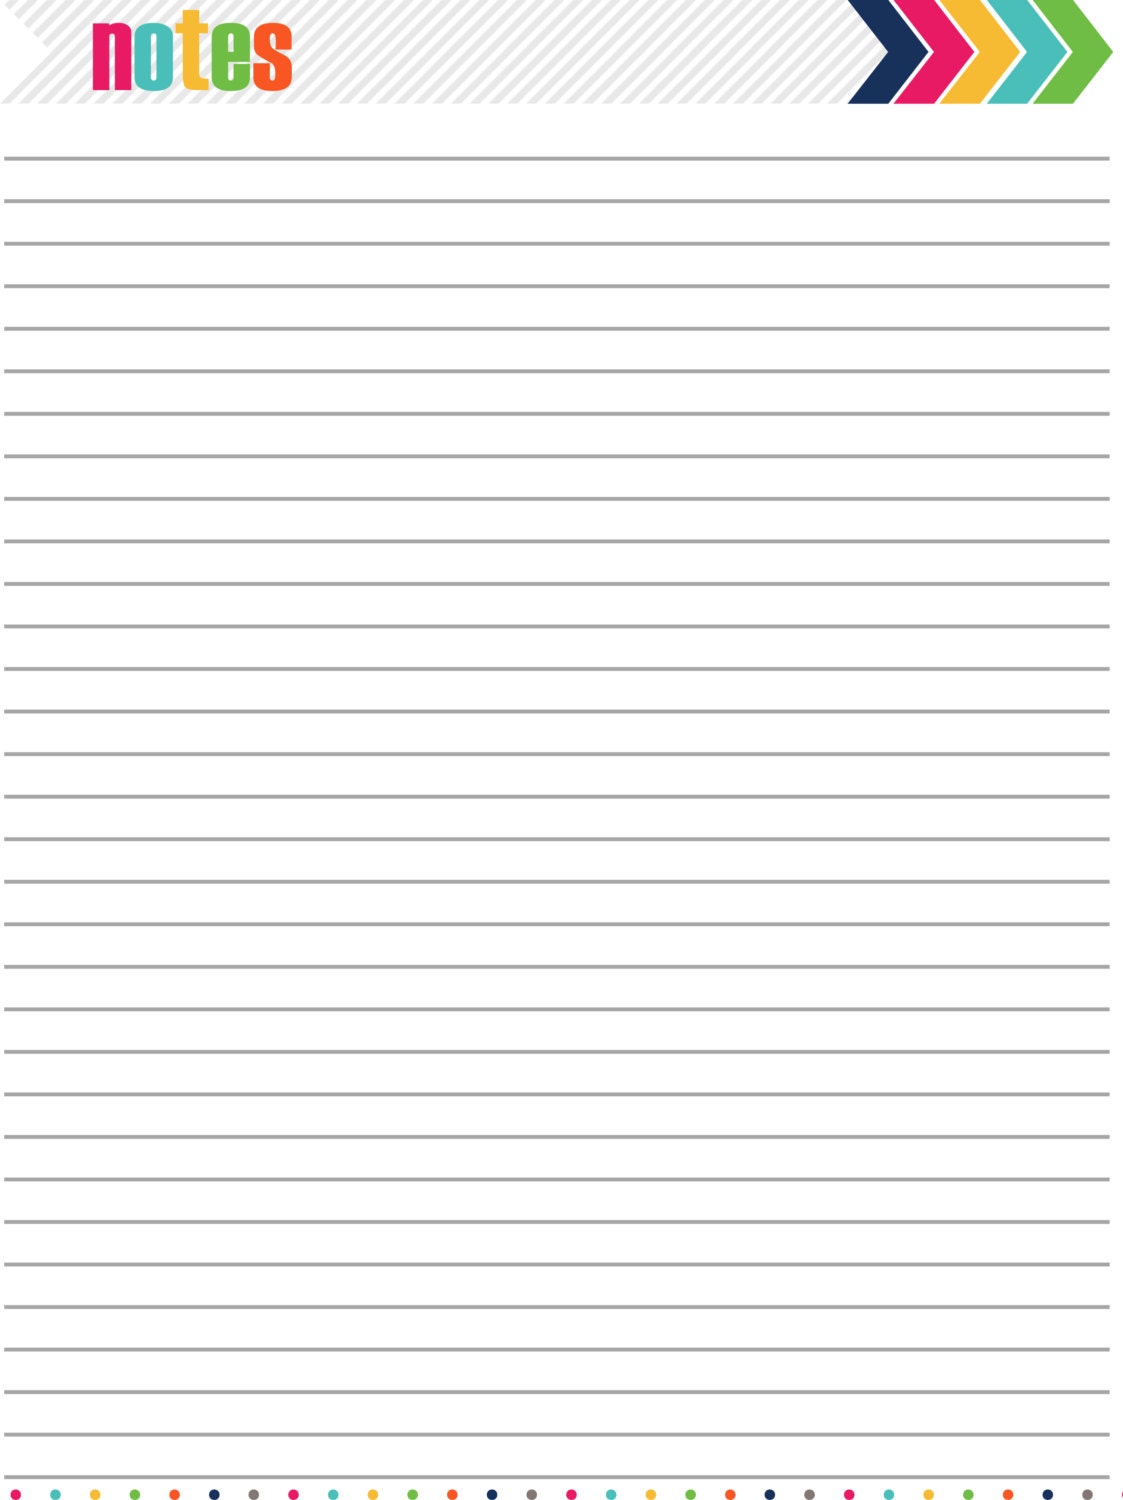 Notes Page Printable INSTANT DOWNLOAD by